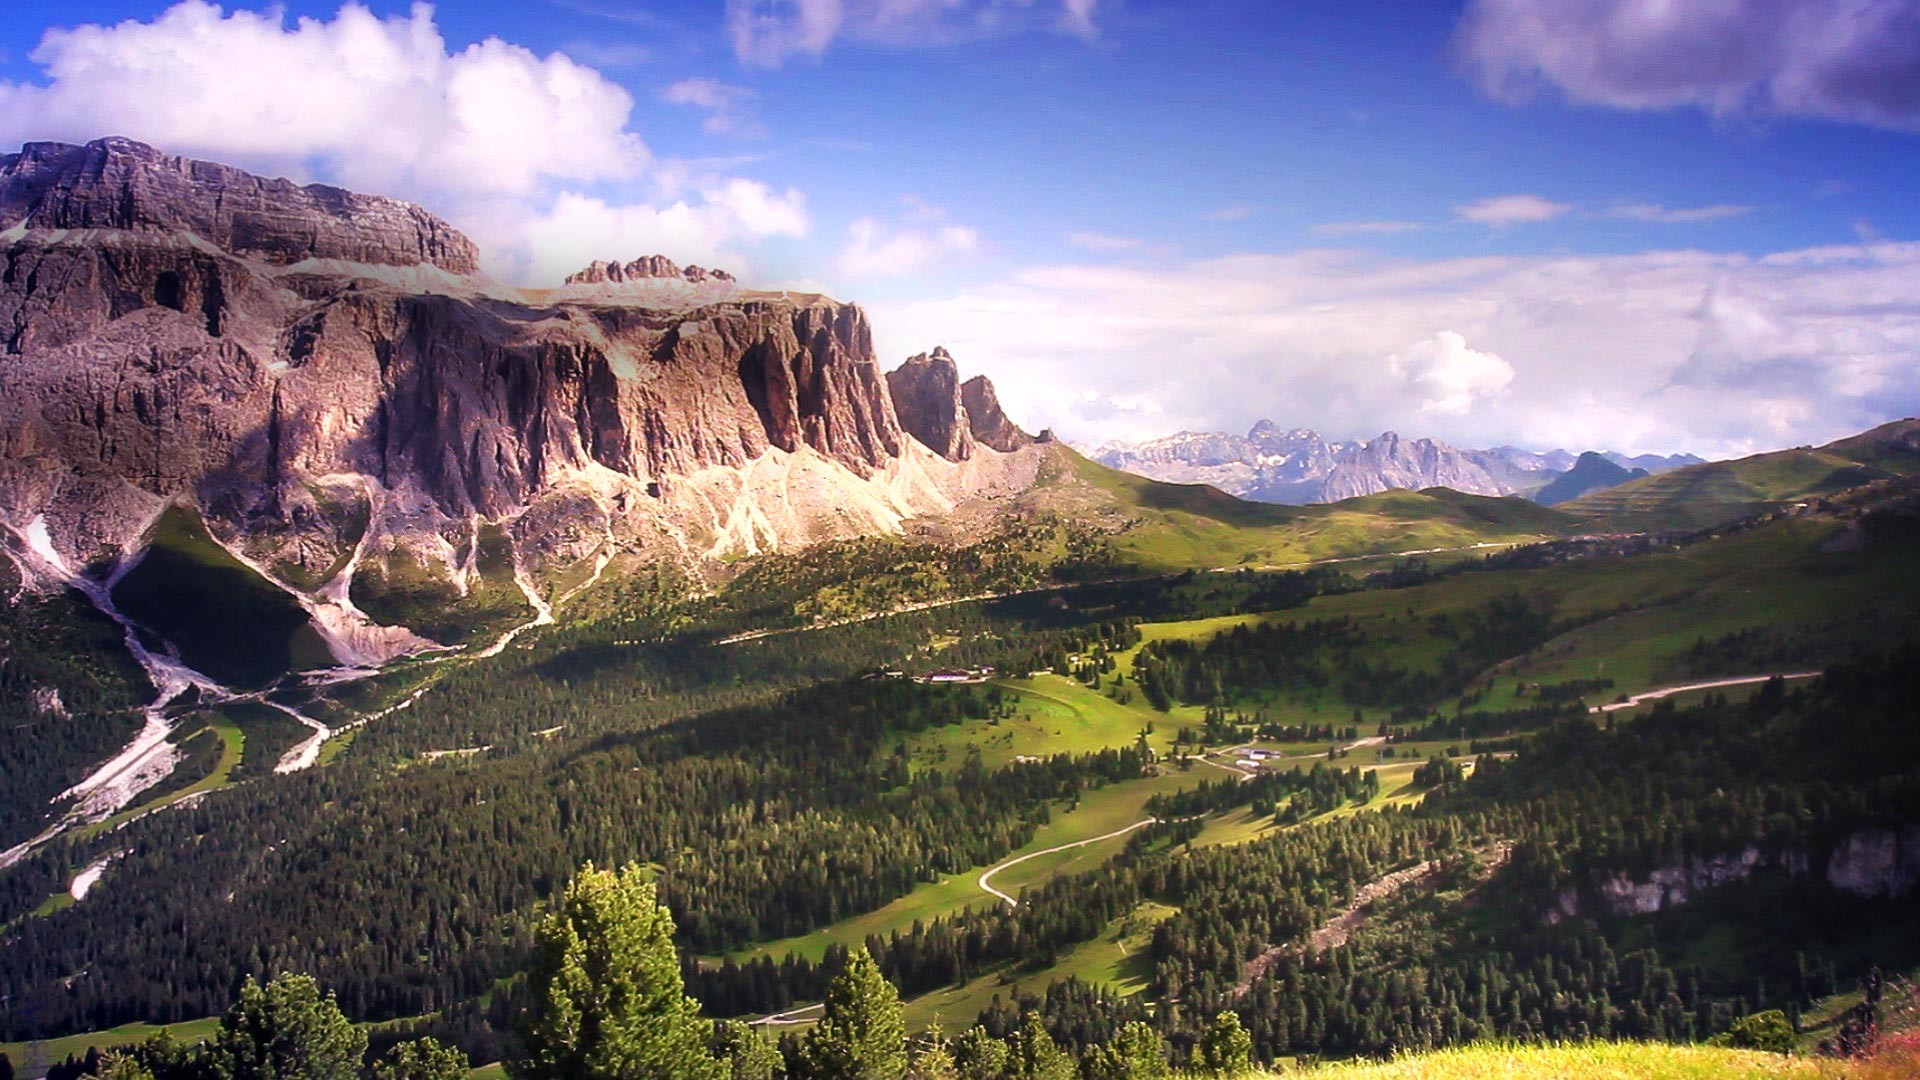 General 1920x1080 nature mountains landscape cliff valley Dolomites